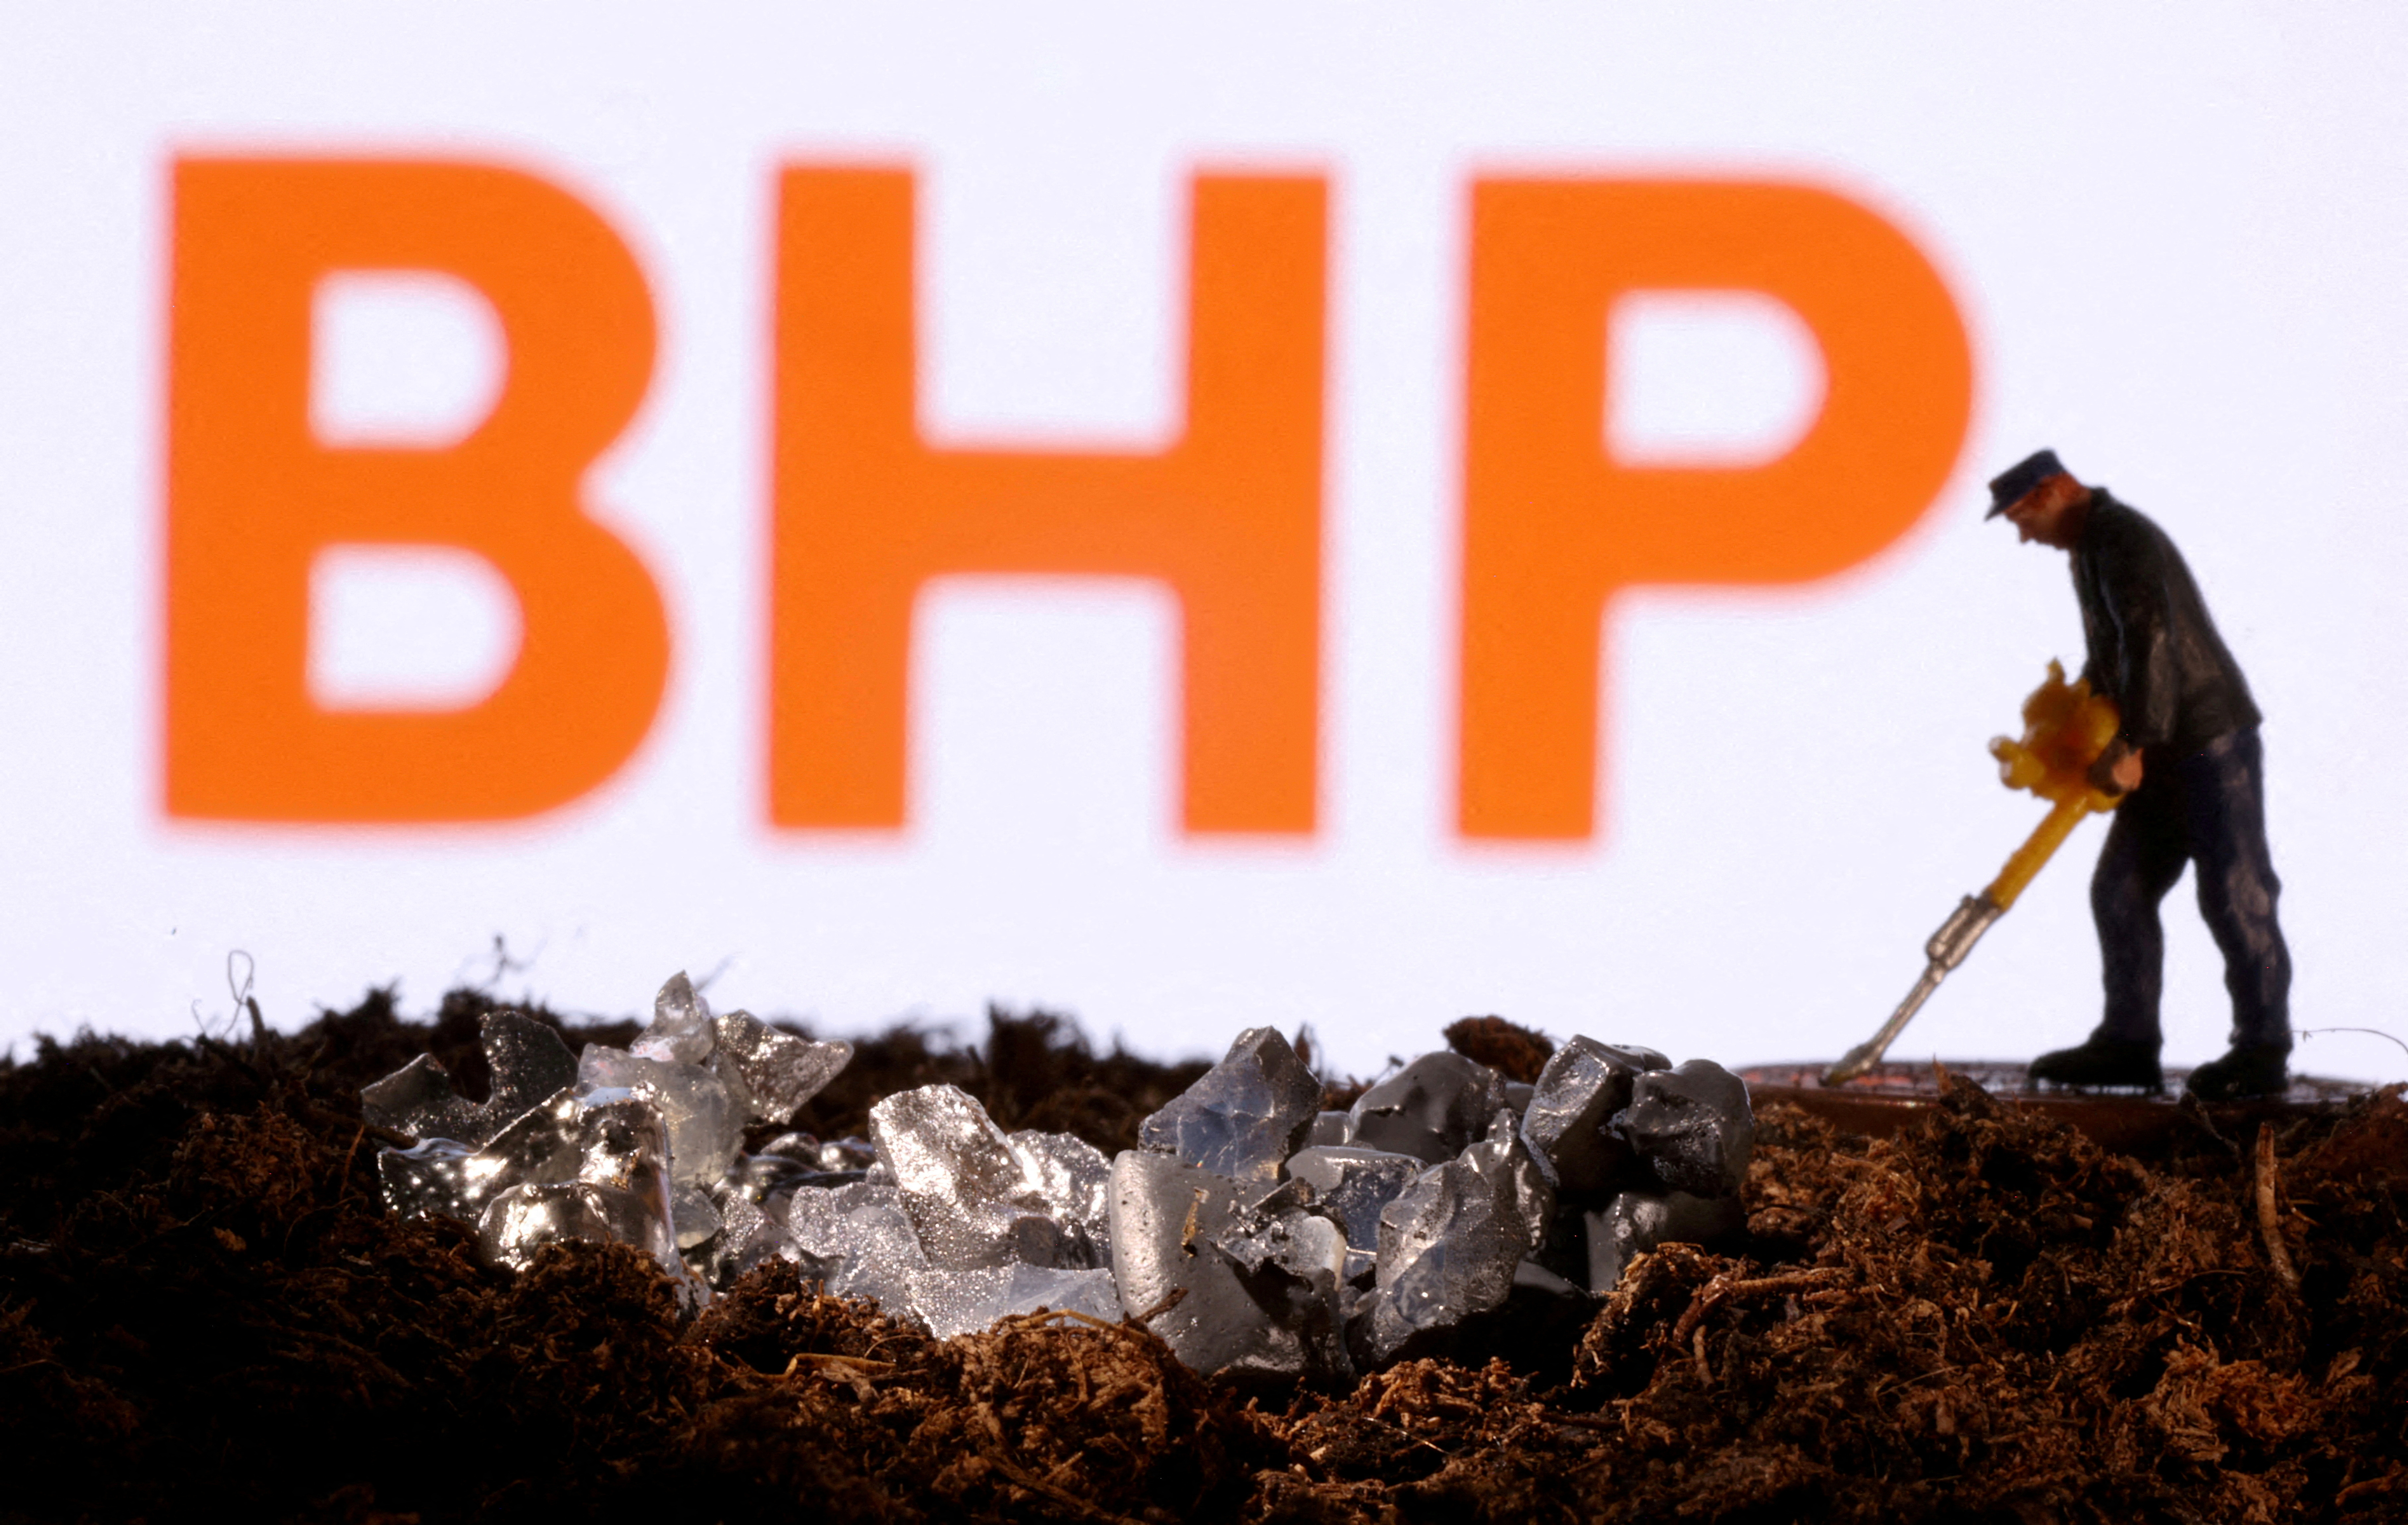 BHP shares jump 2.3% after Anglo announces break-up plan